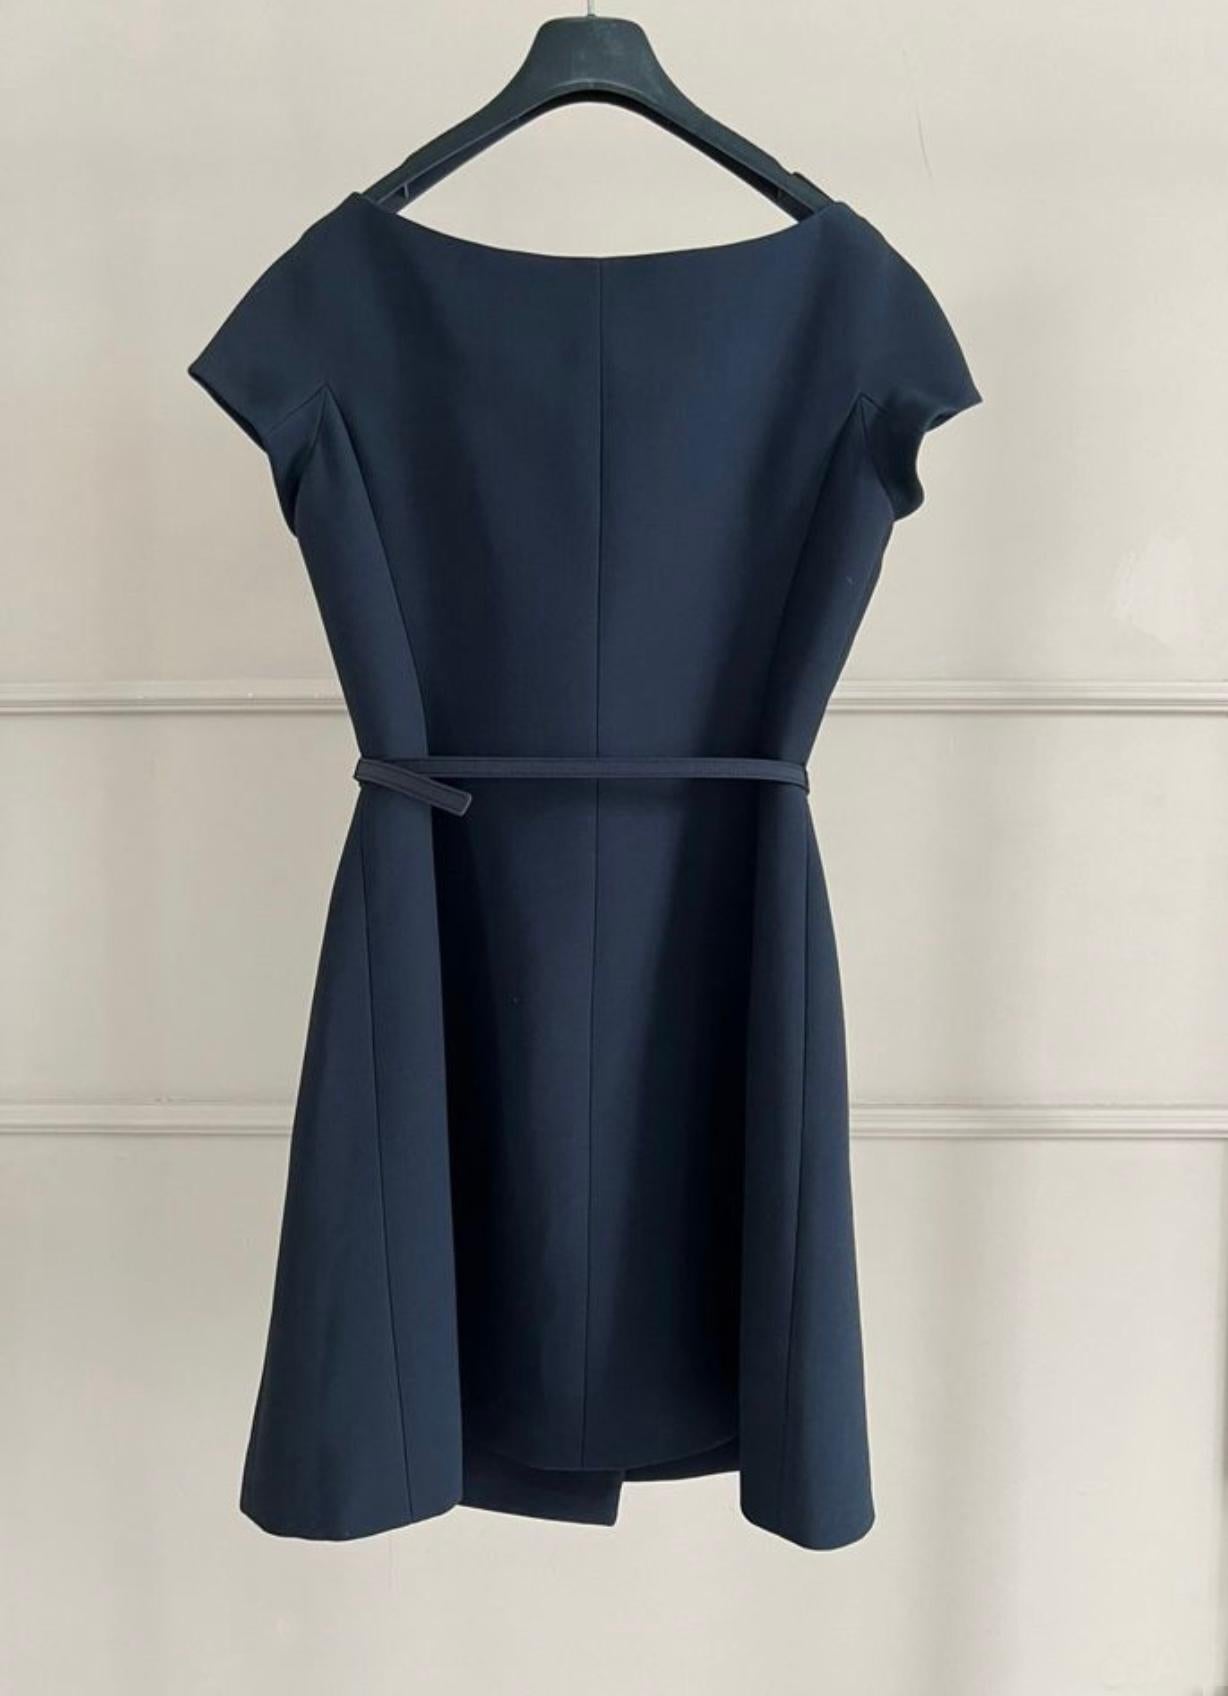 Dior 5K$ Iconic Dark Navy Double Breasted Dress 3